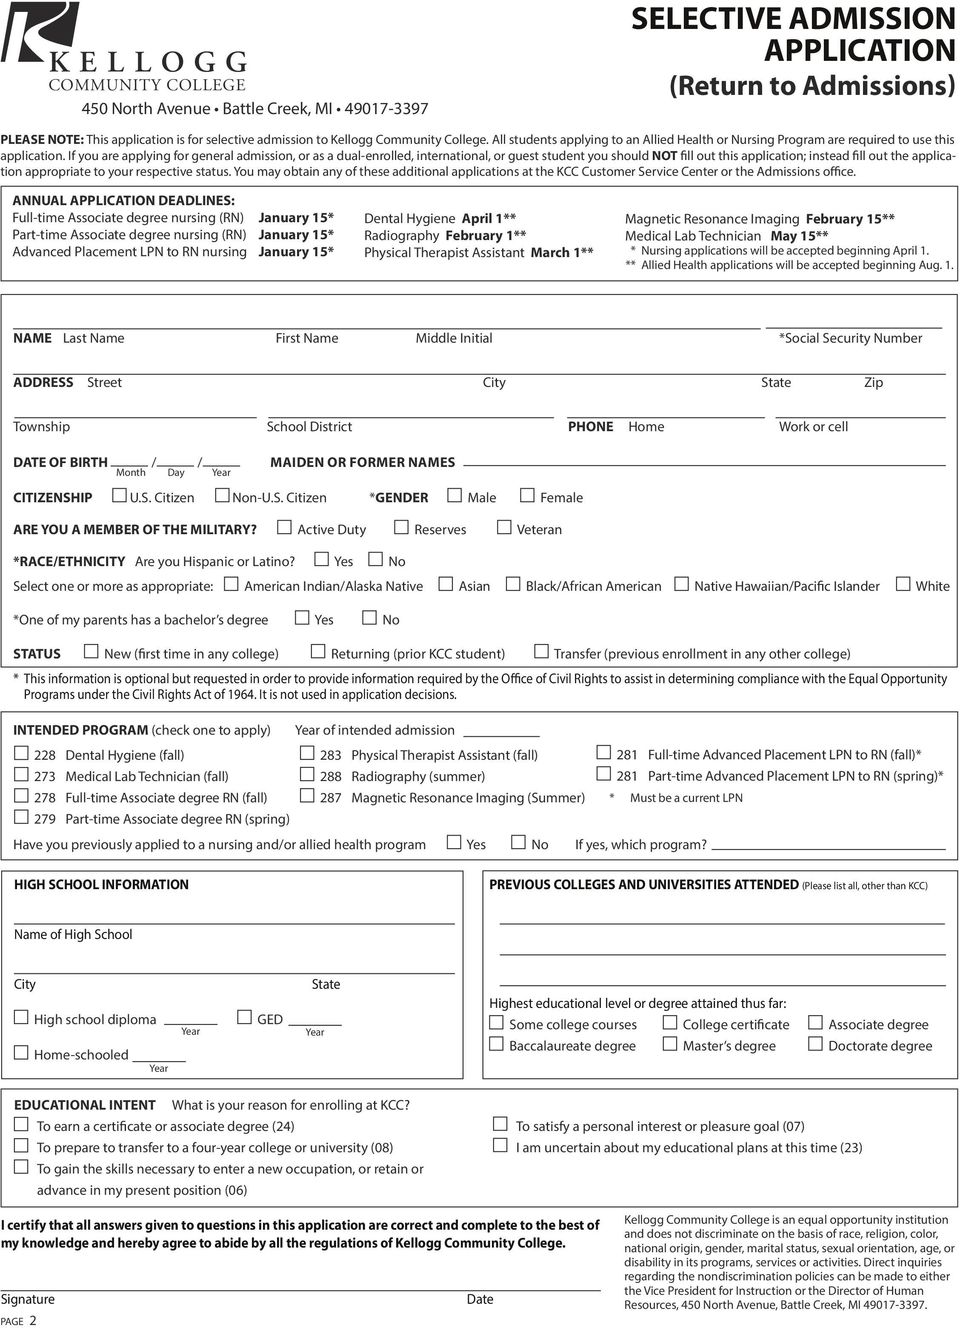 If you are applying for general admission, or as a dual-enrolled, international, or guest student you should NOT fill out this application; instead fill out the application appropriate to your